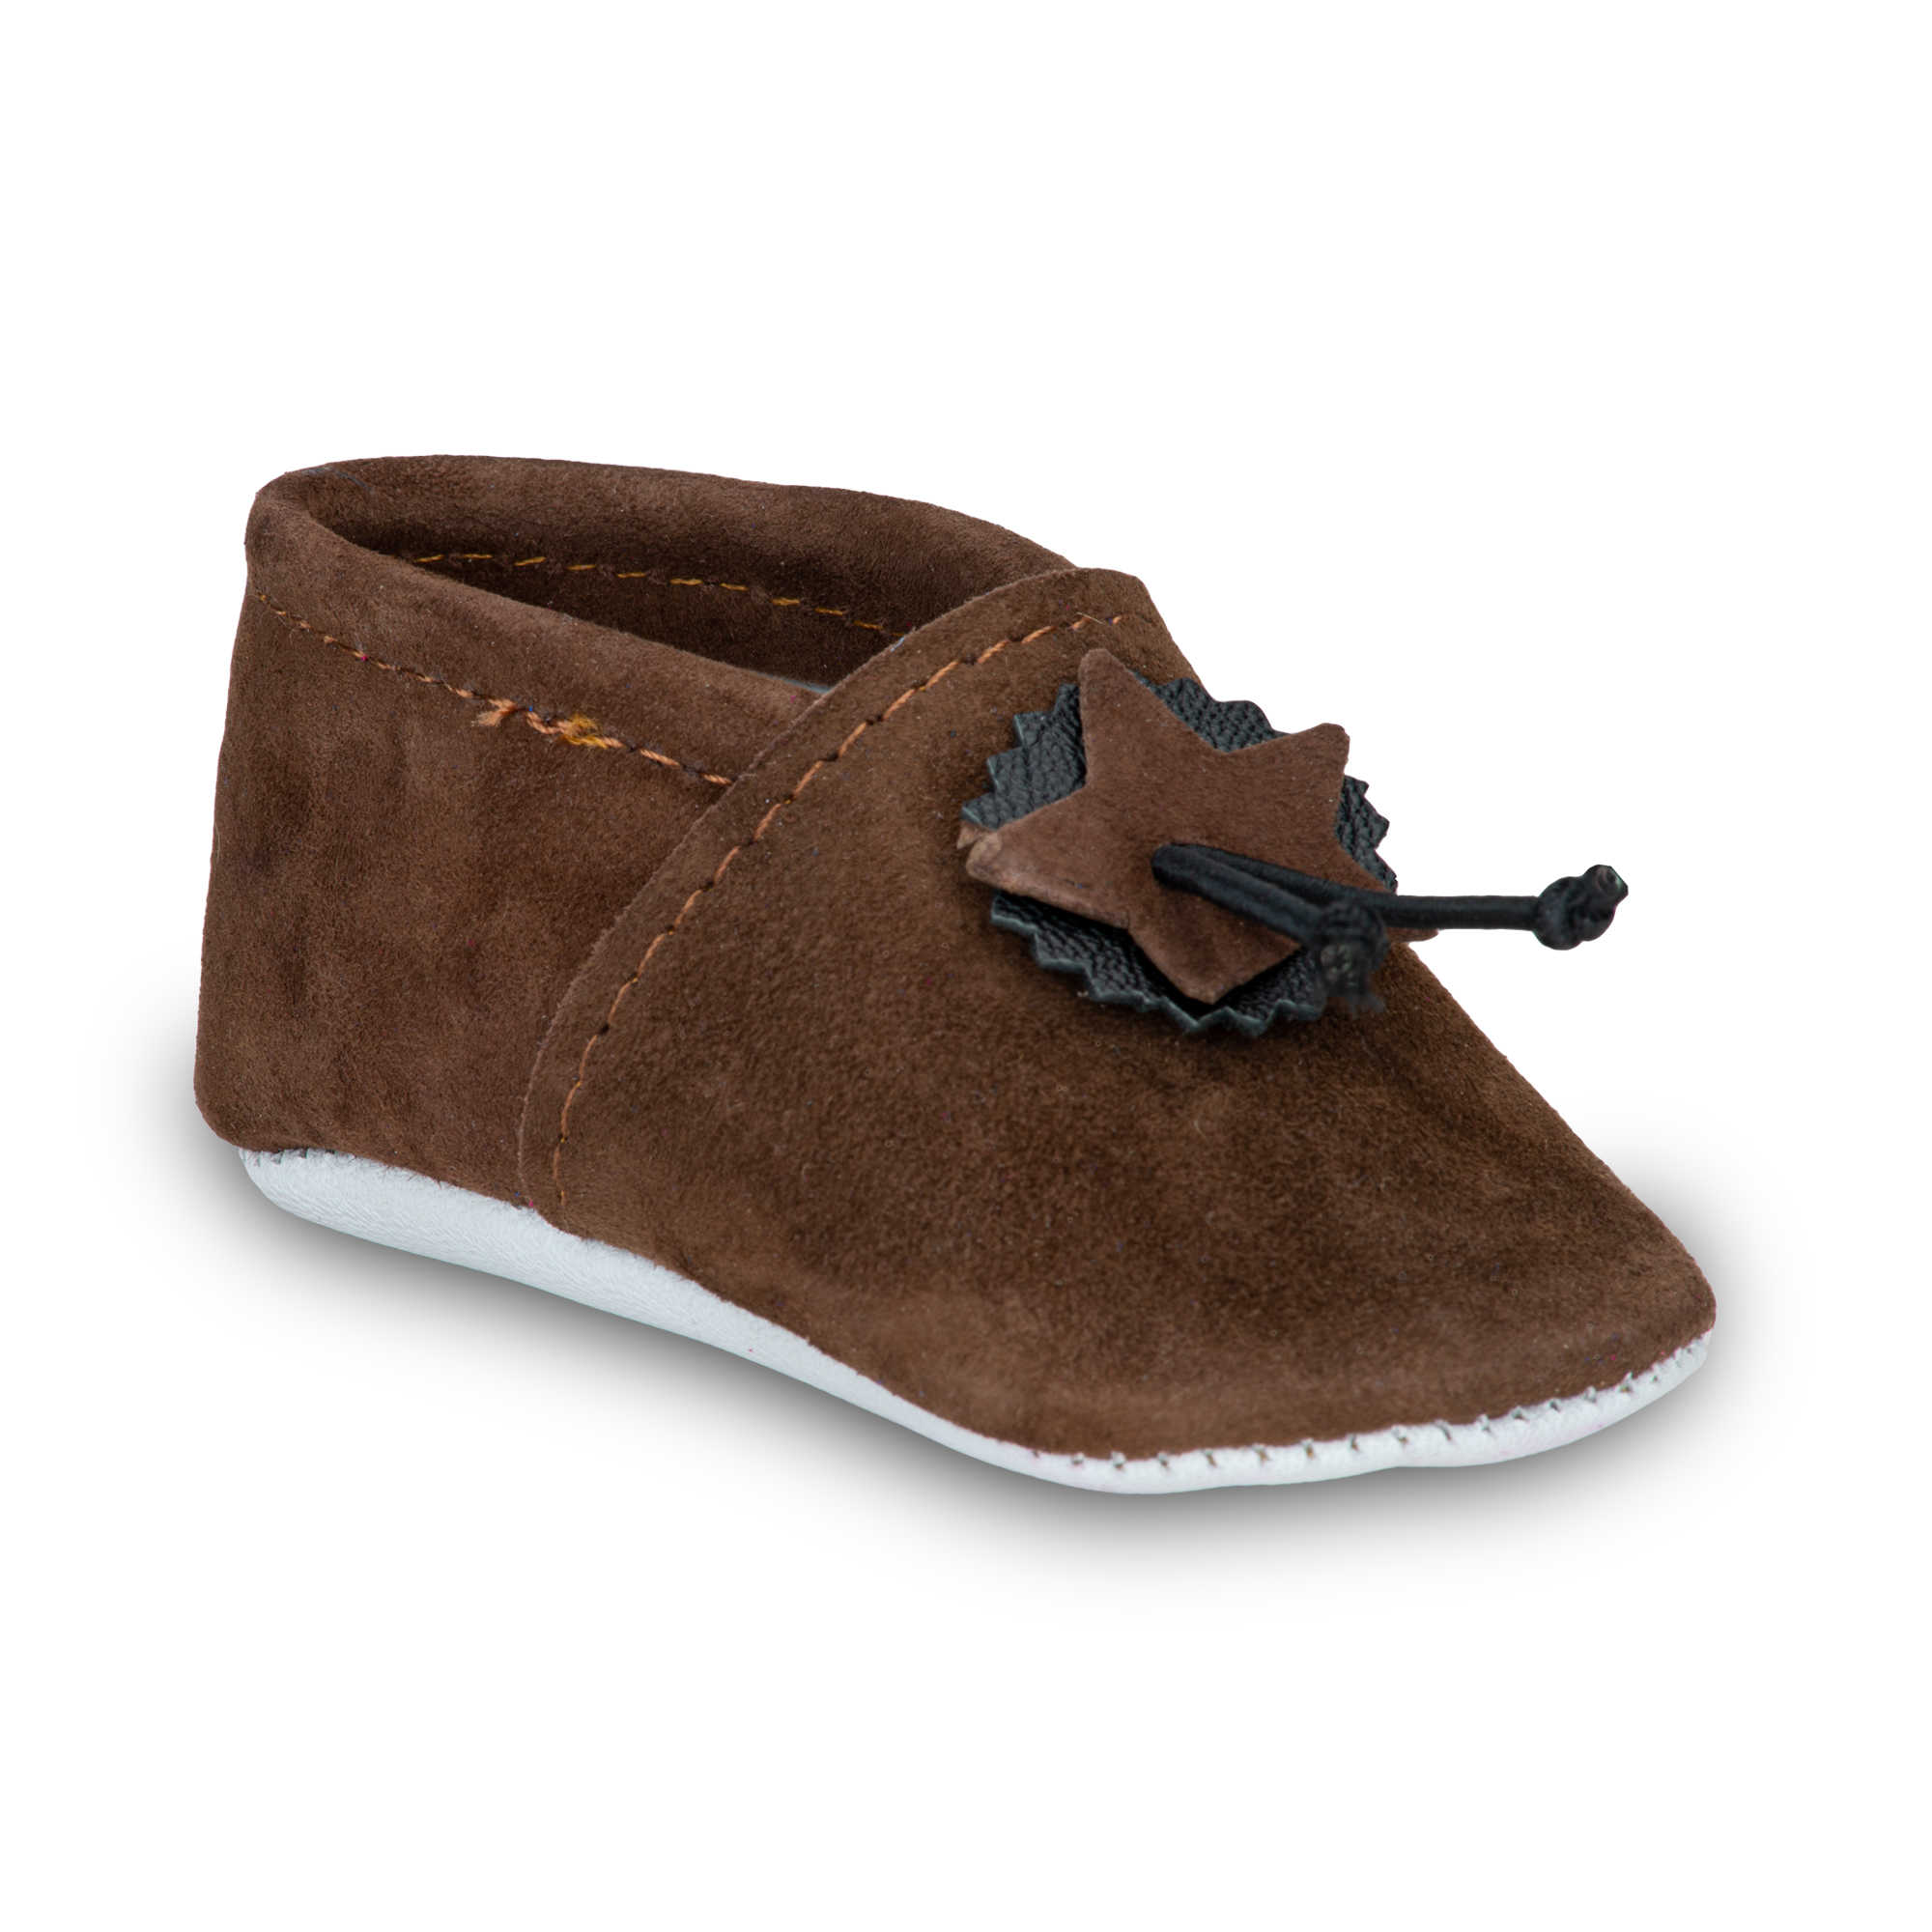 Chaussons souples bebe marron taille 22